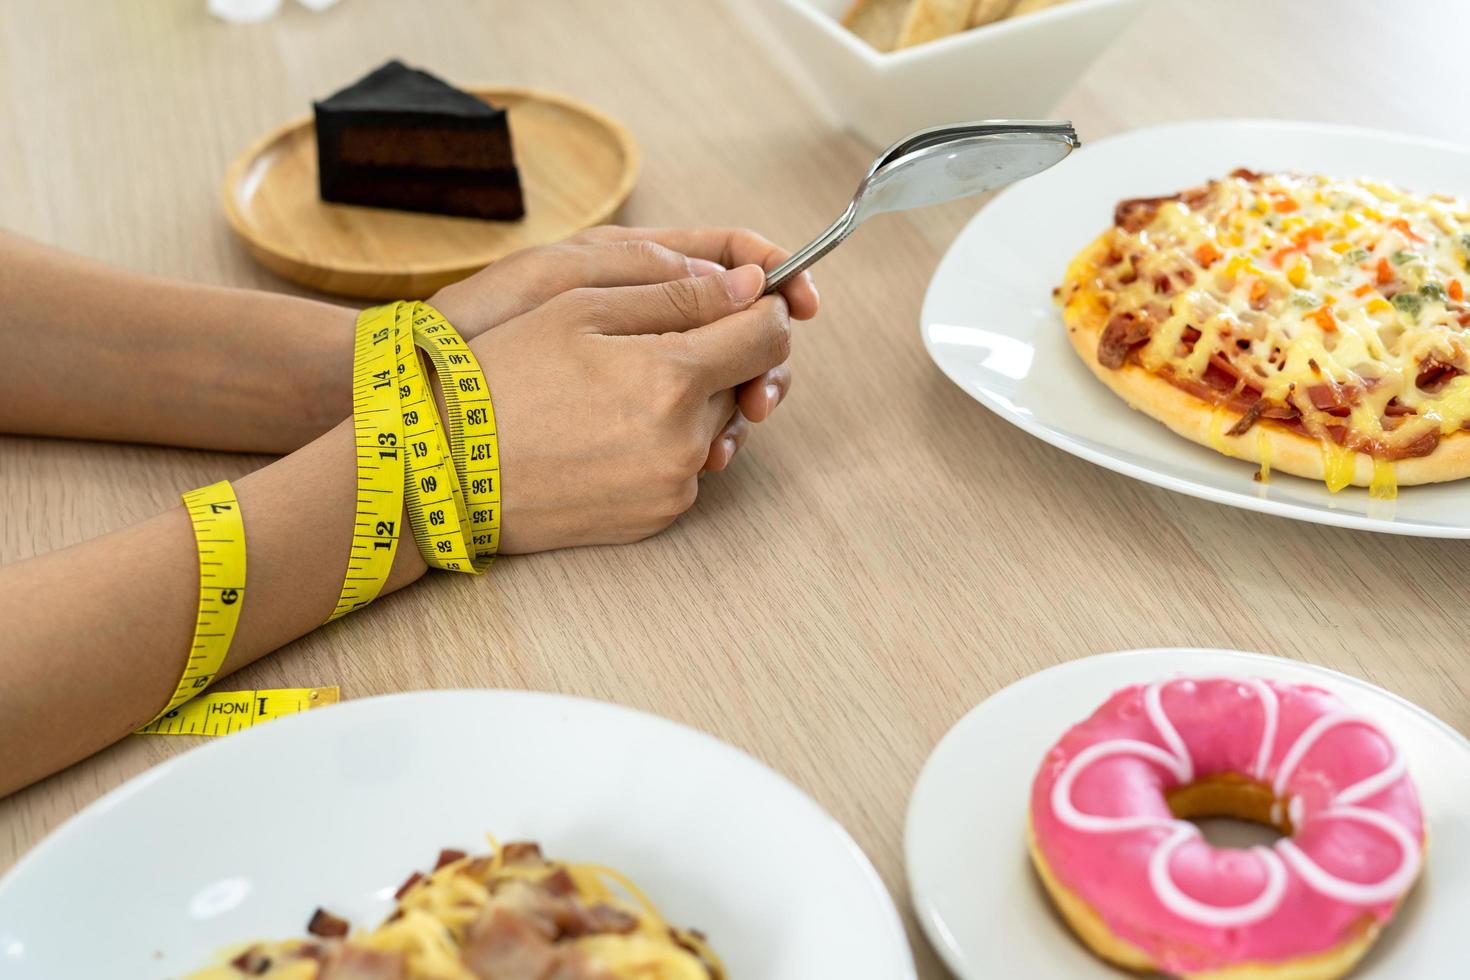 Tape measure around the arms of women. Stop eating trans fats, spaghetti, donuts, waffles and sweets. Lose weight for good health. Top view diet concept photo